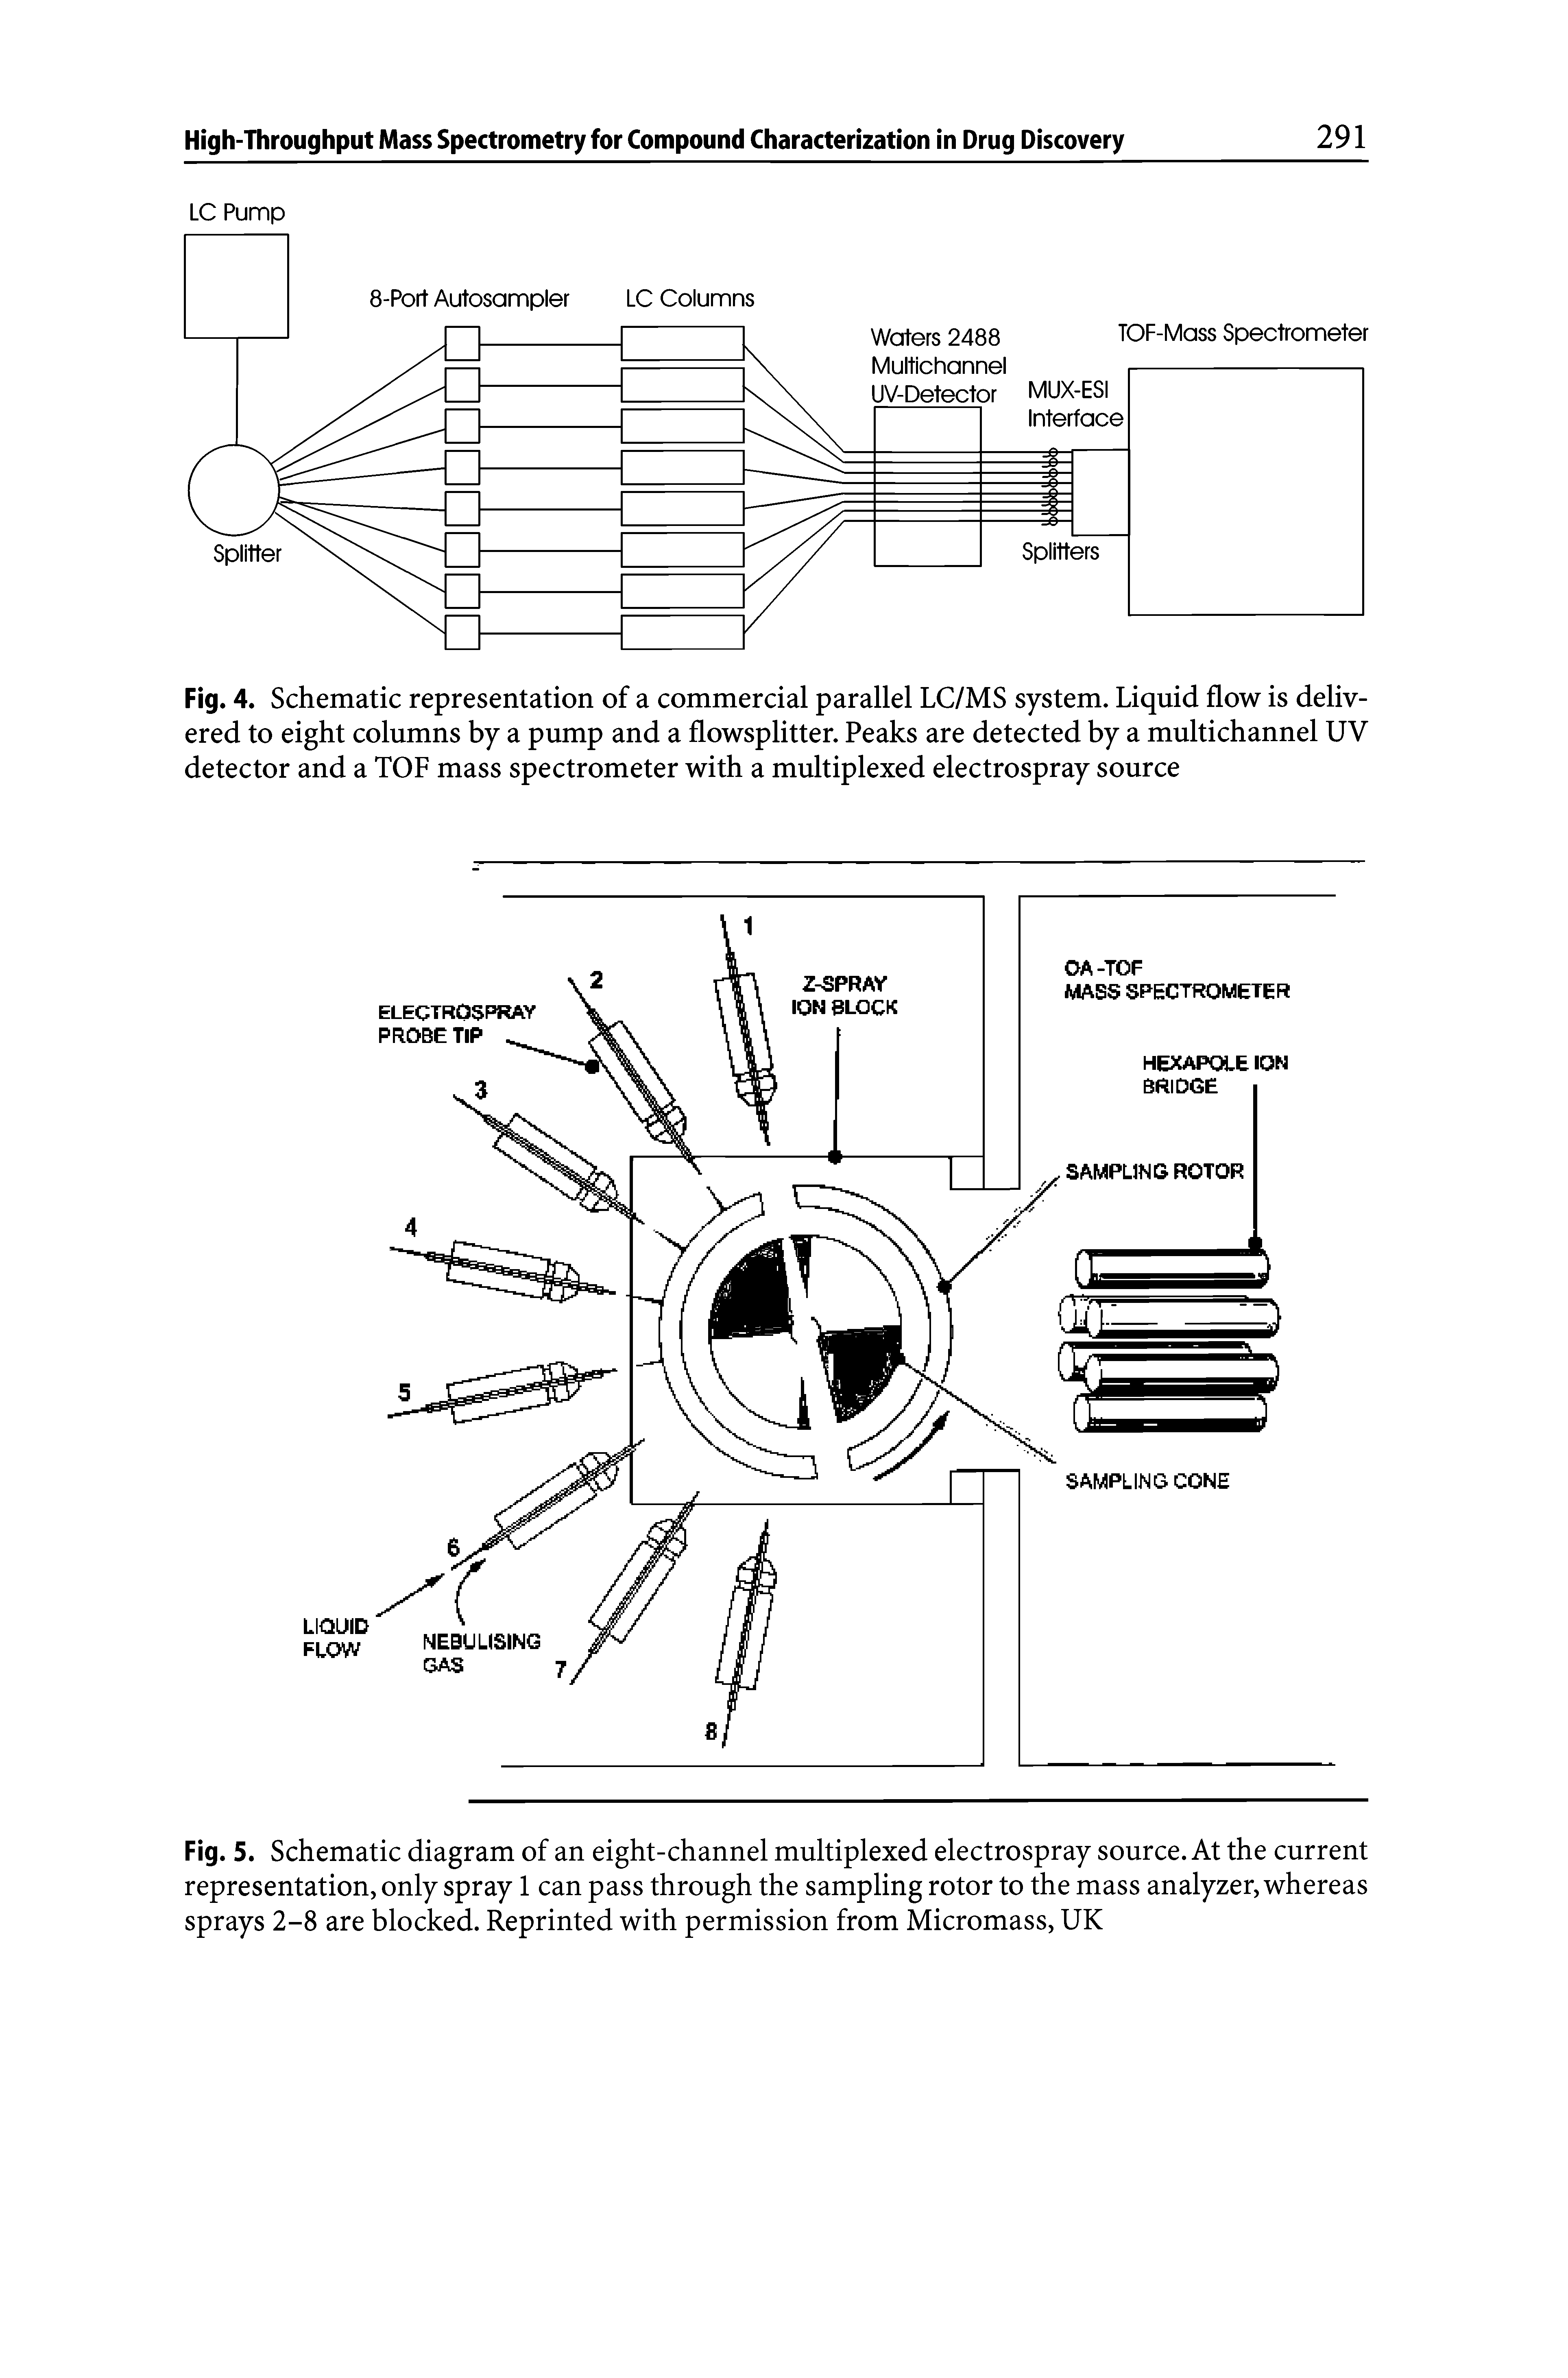 Fig. 5. Schematic diagram of an eight-channel multiplexed electrospray source. At the current representation, only spray 1 can pass through the sampling rotor to the mass analyzer, whereas sprays 2-8 are blocked. Reprinted with permission from Micromass, UK...